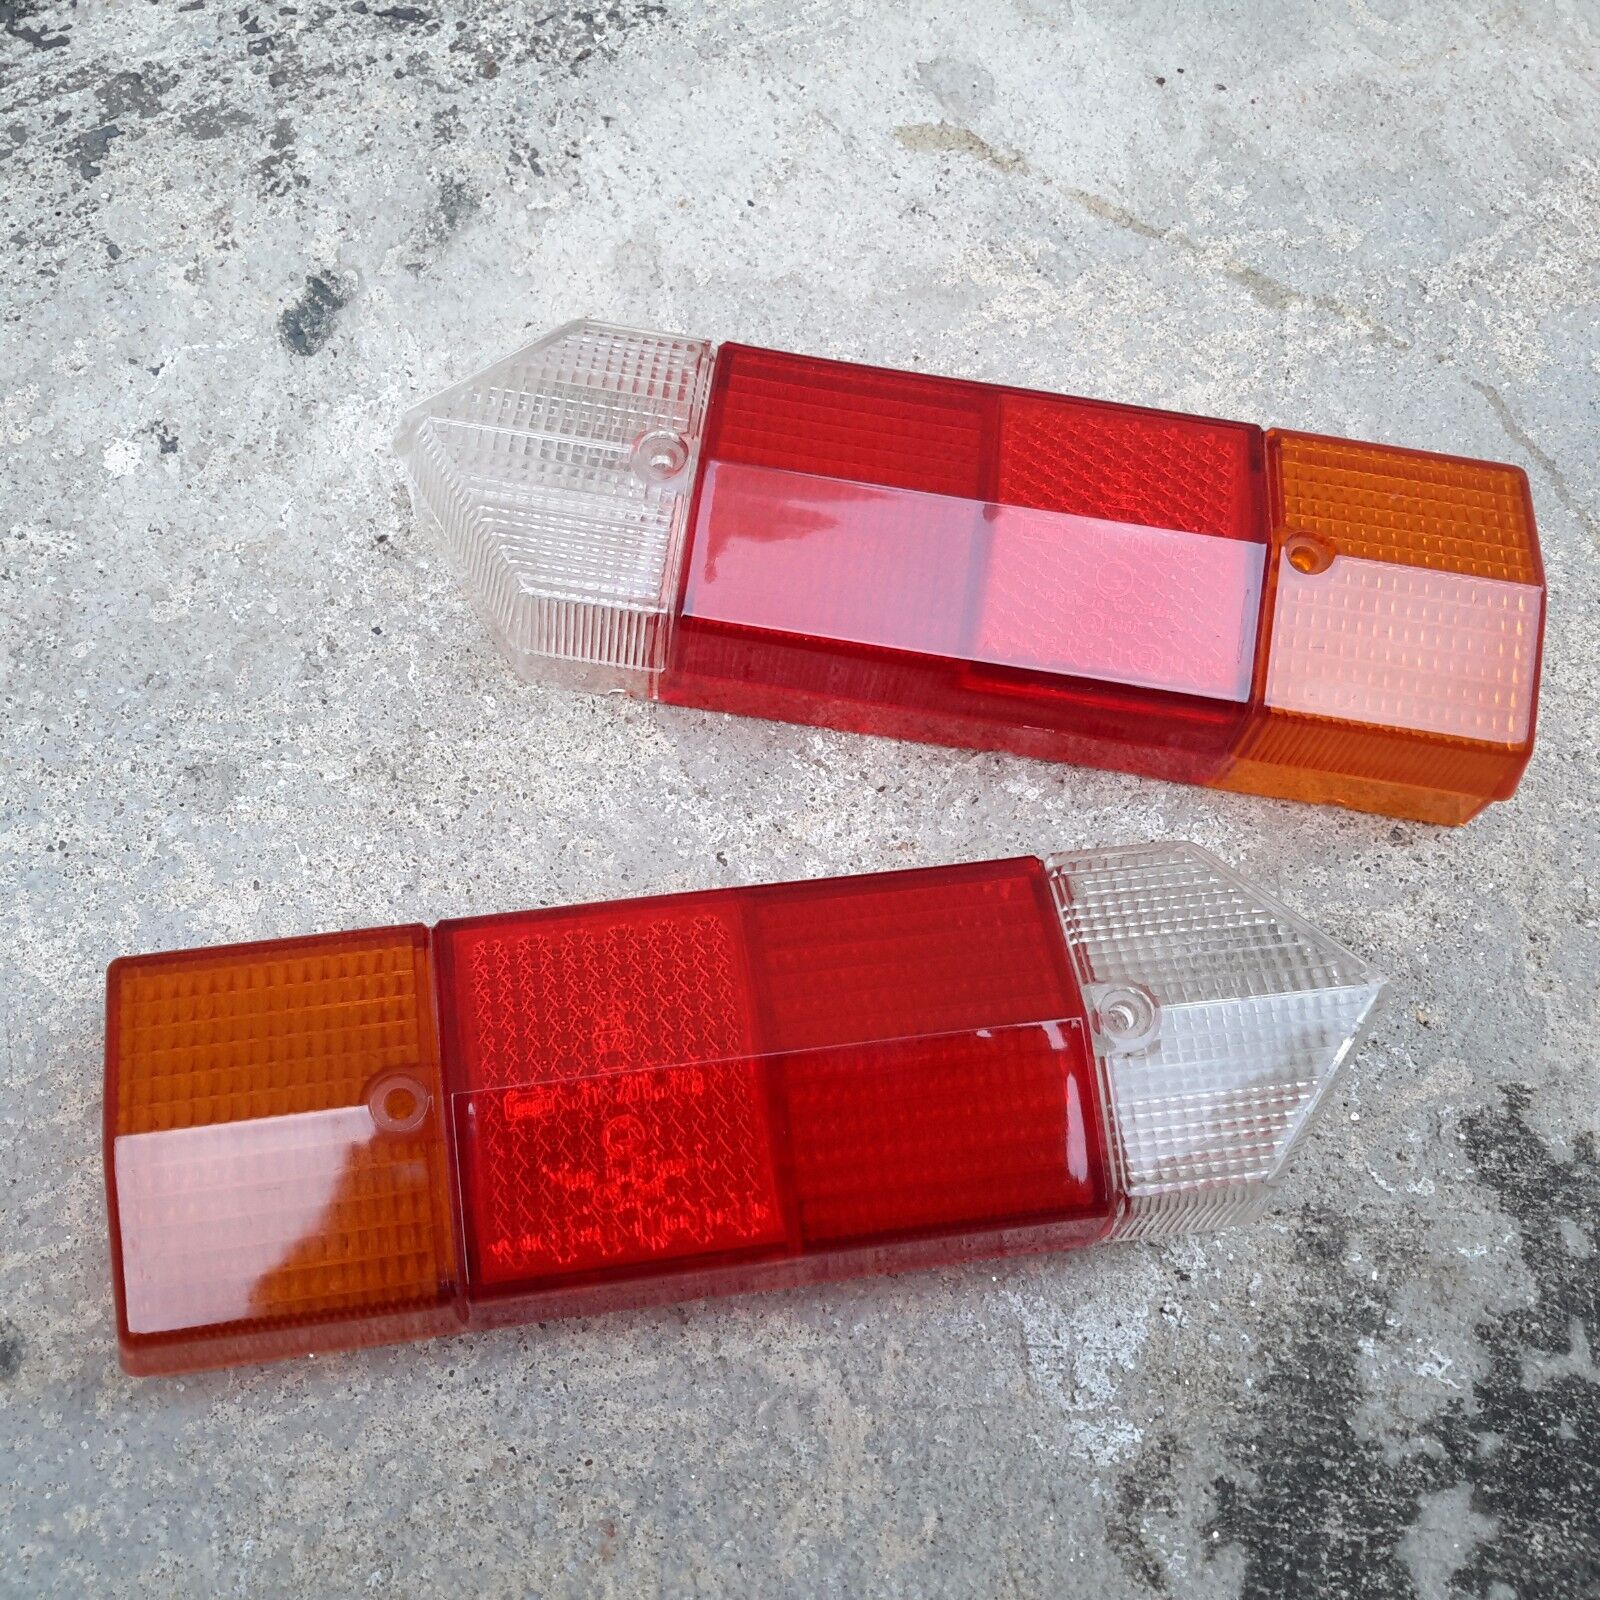 FORD TAUNUS P7a 17M 1700s Tail Light Rear Lamp Cover Lens Genuine Parts NOS